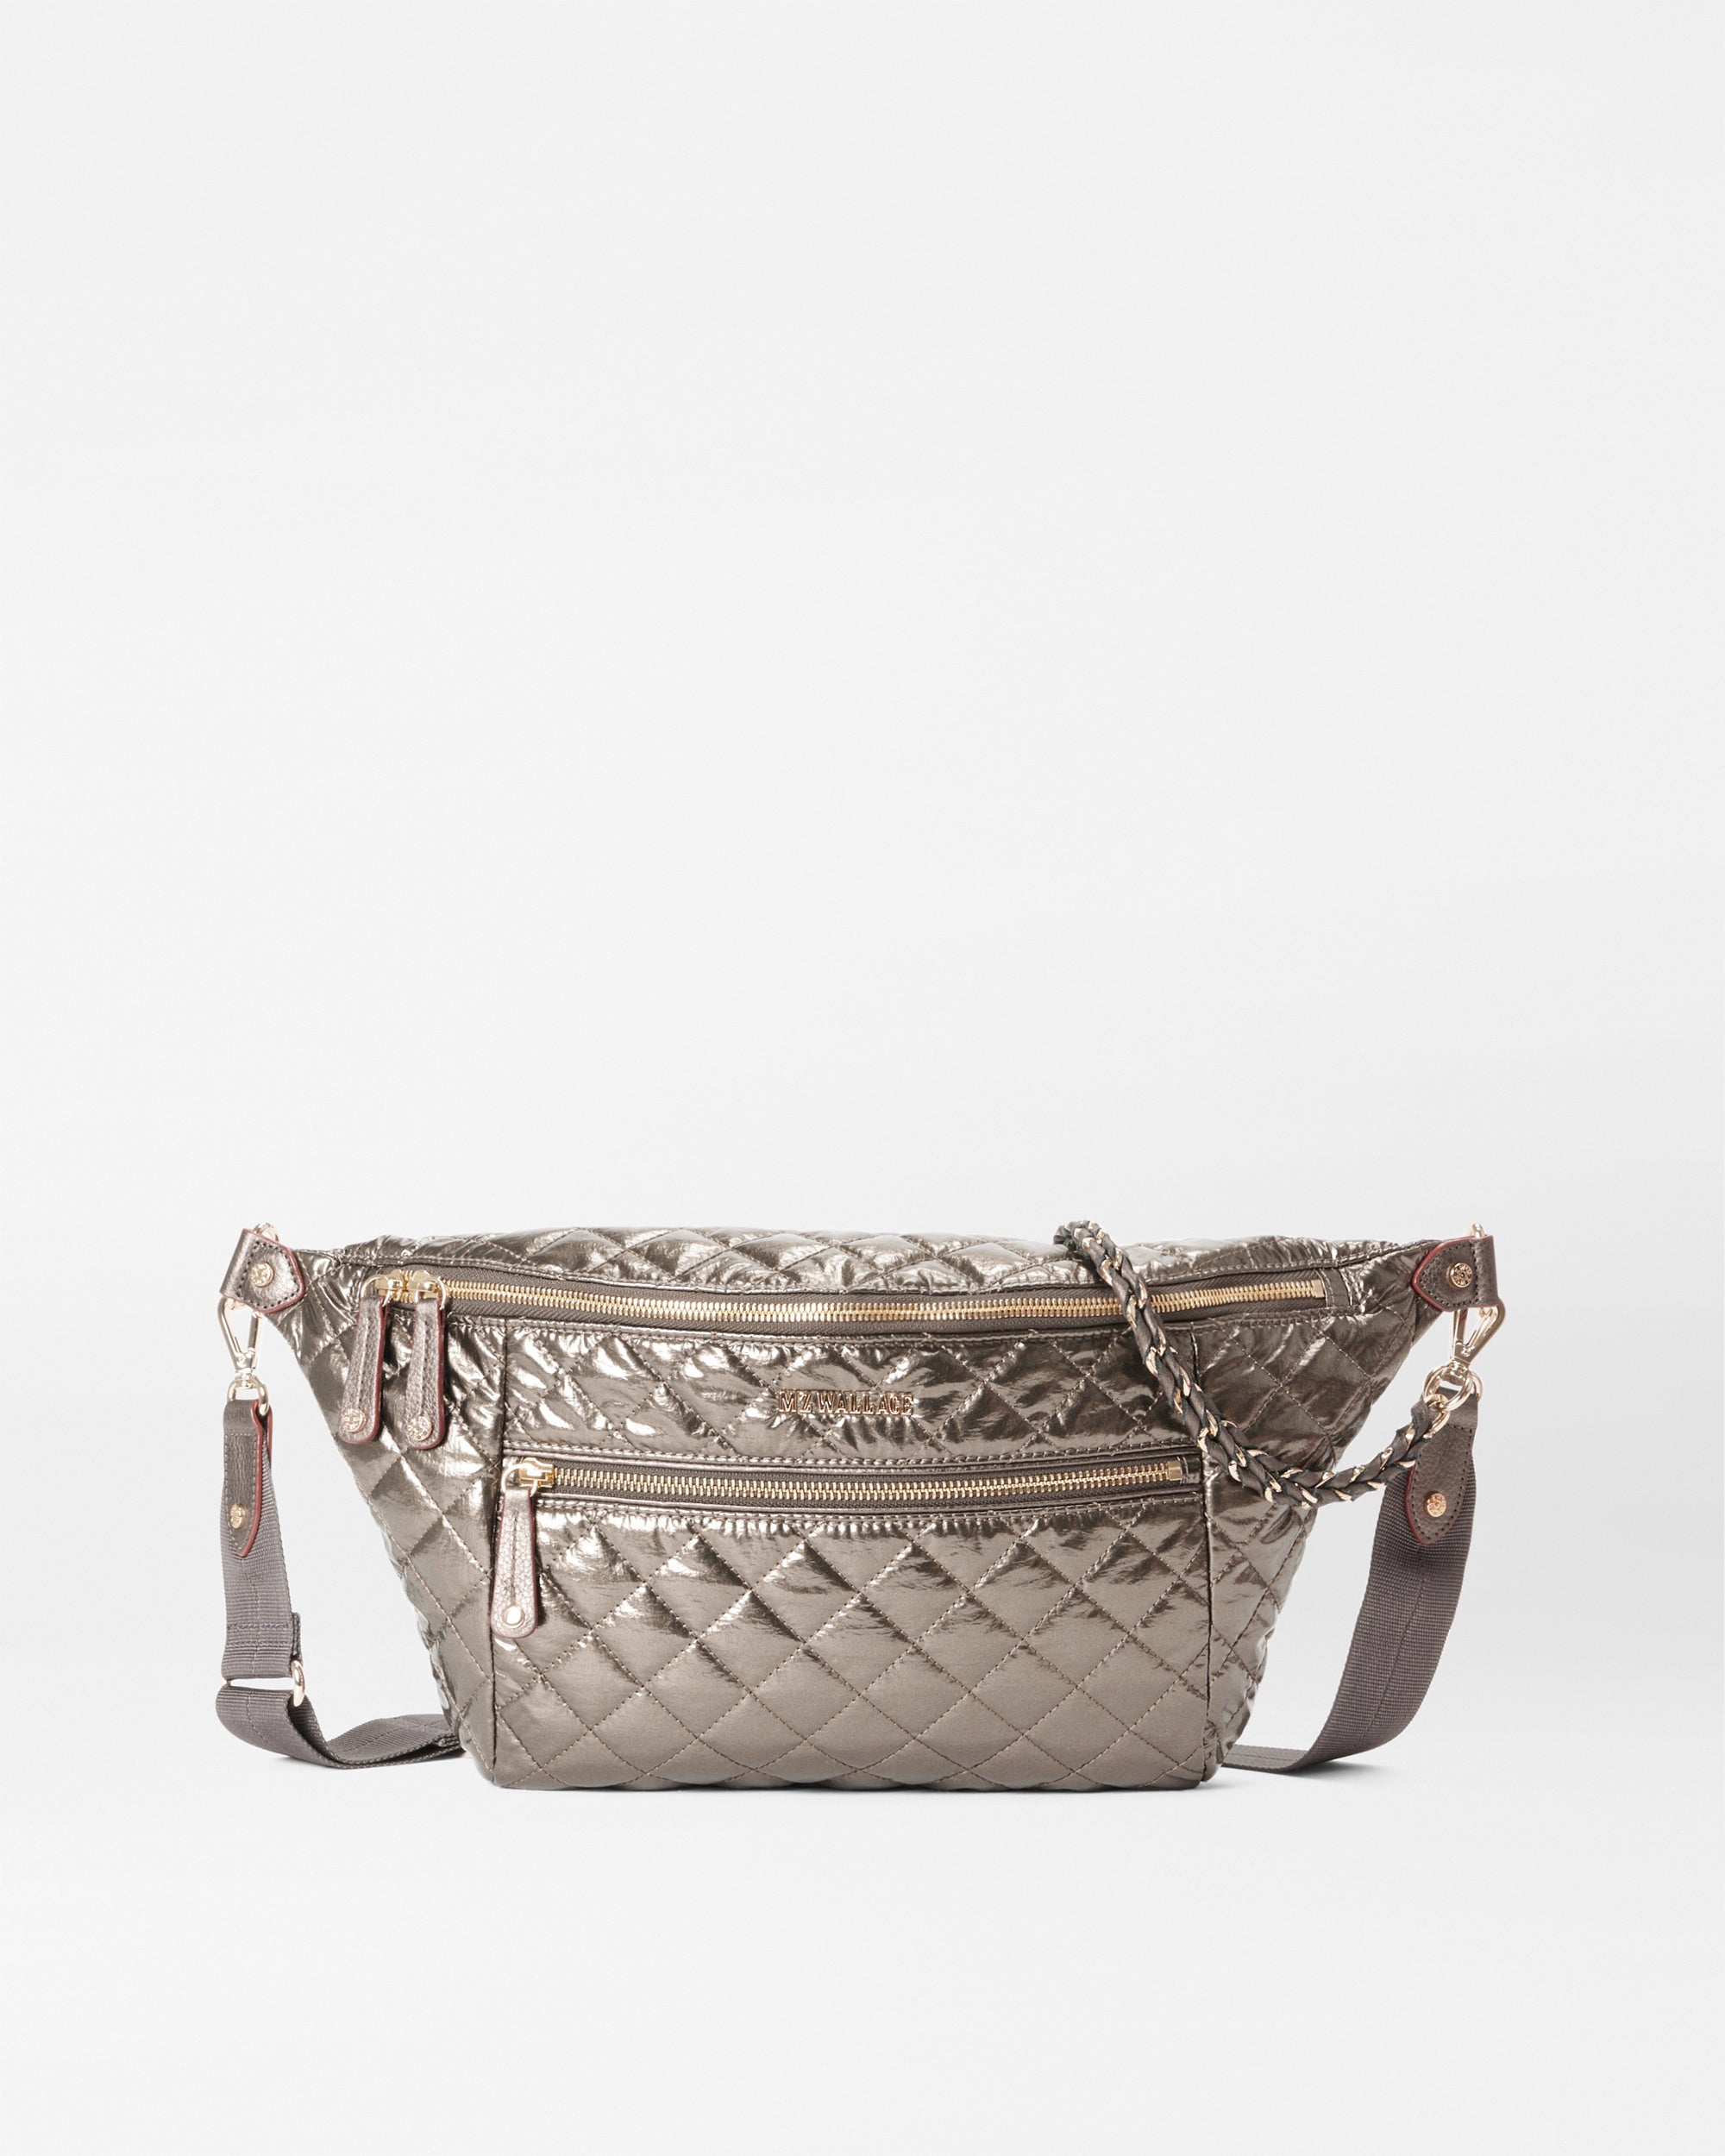 Versatile and chic, the Crosby Sling is the ultimate sidekick